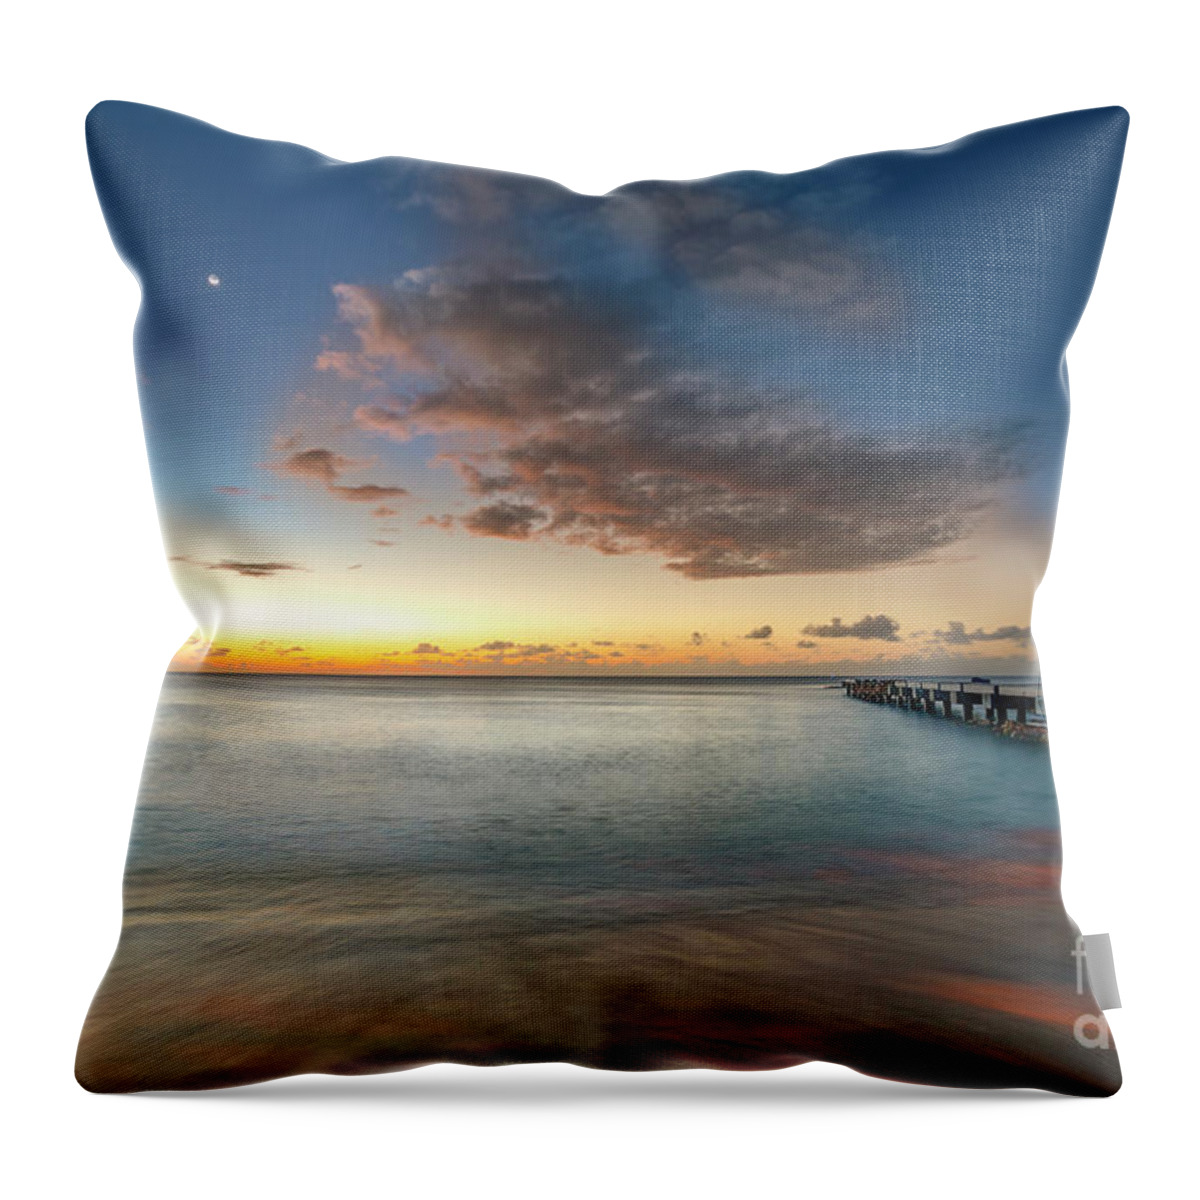  Throw Pillow featuring the photograph As Day Becomes Night by Hugh Walker